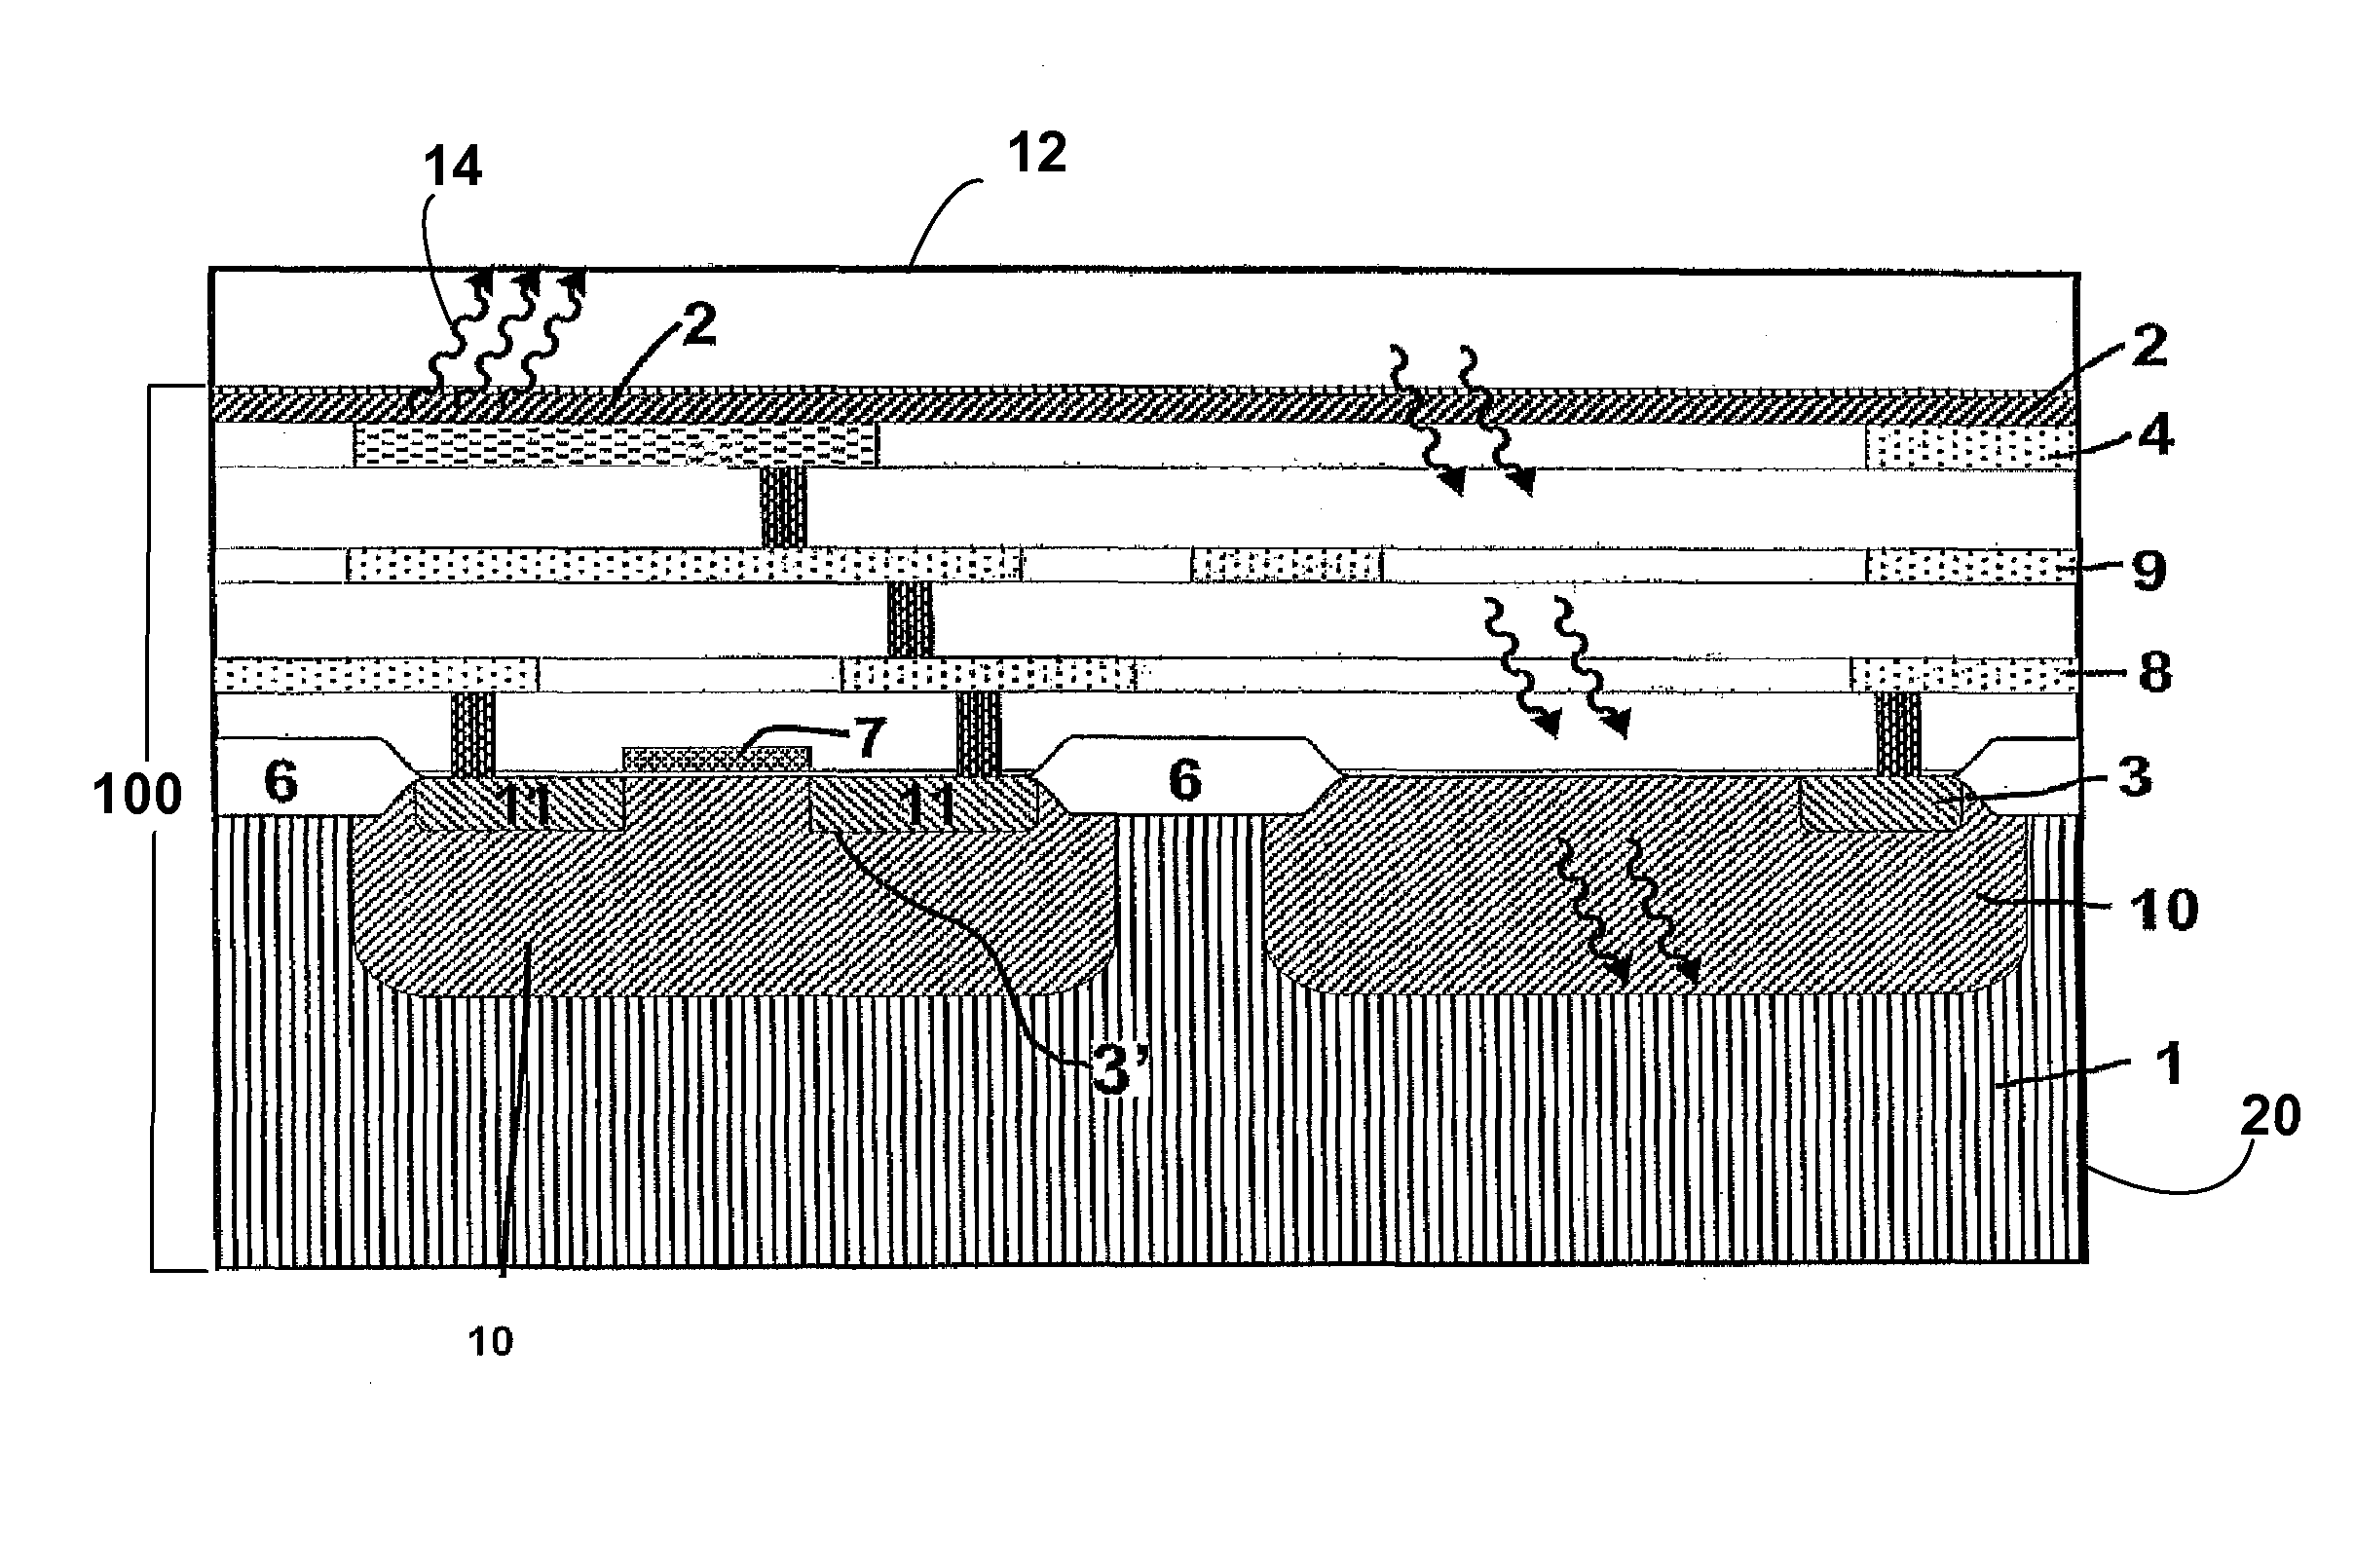 Optical arrangement comprising emitters and detectors on a common substrate